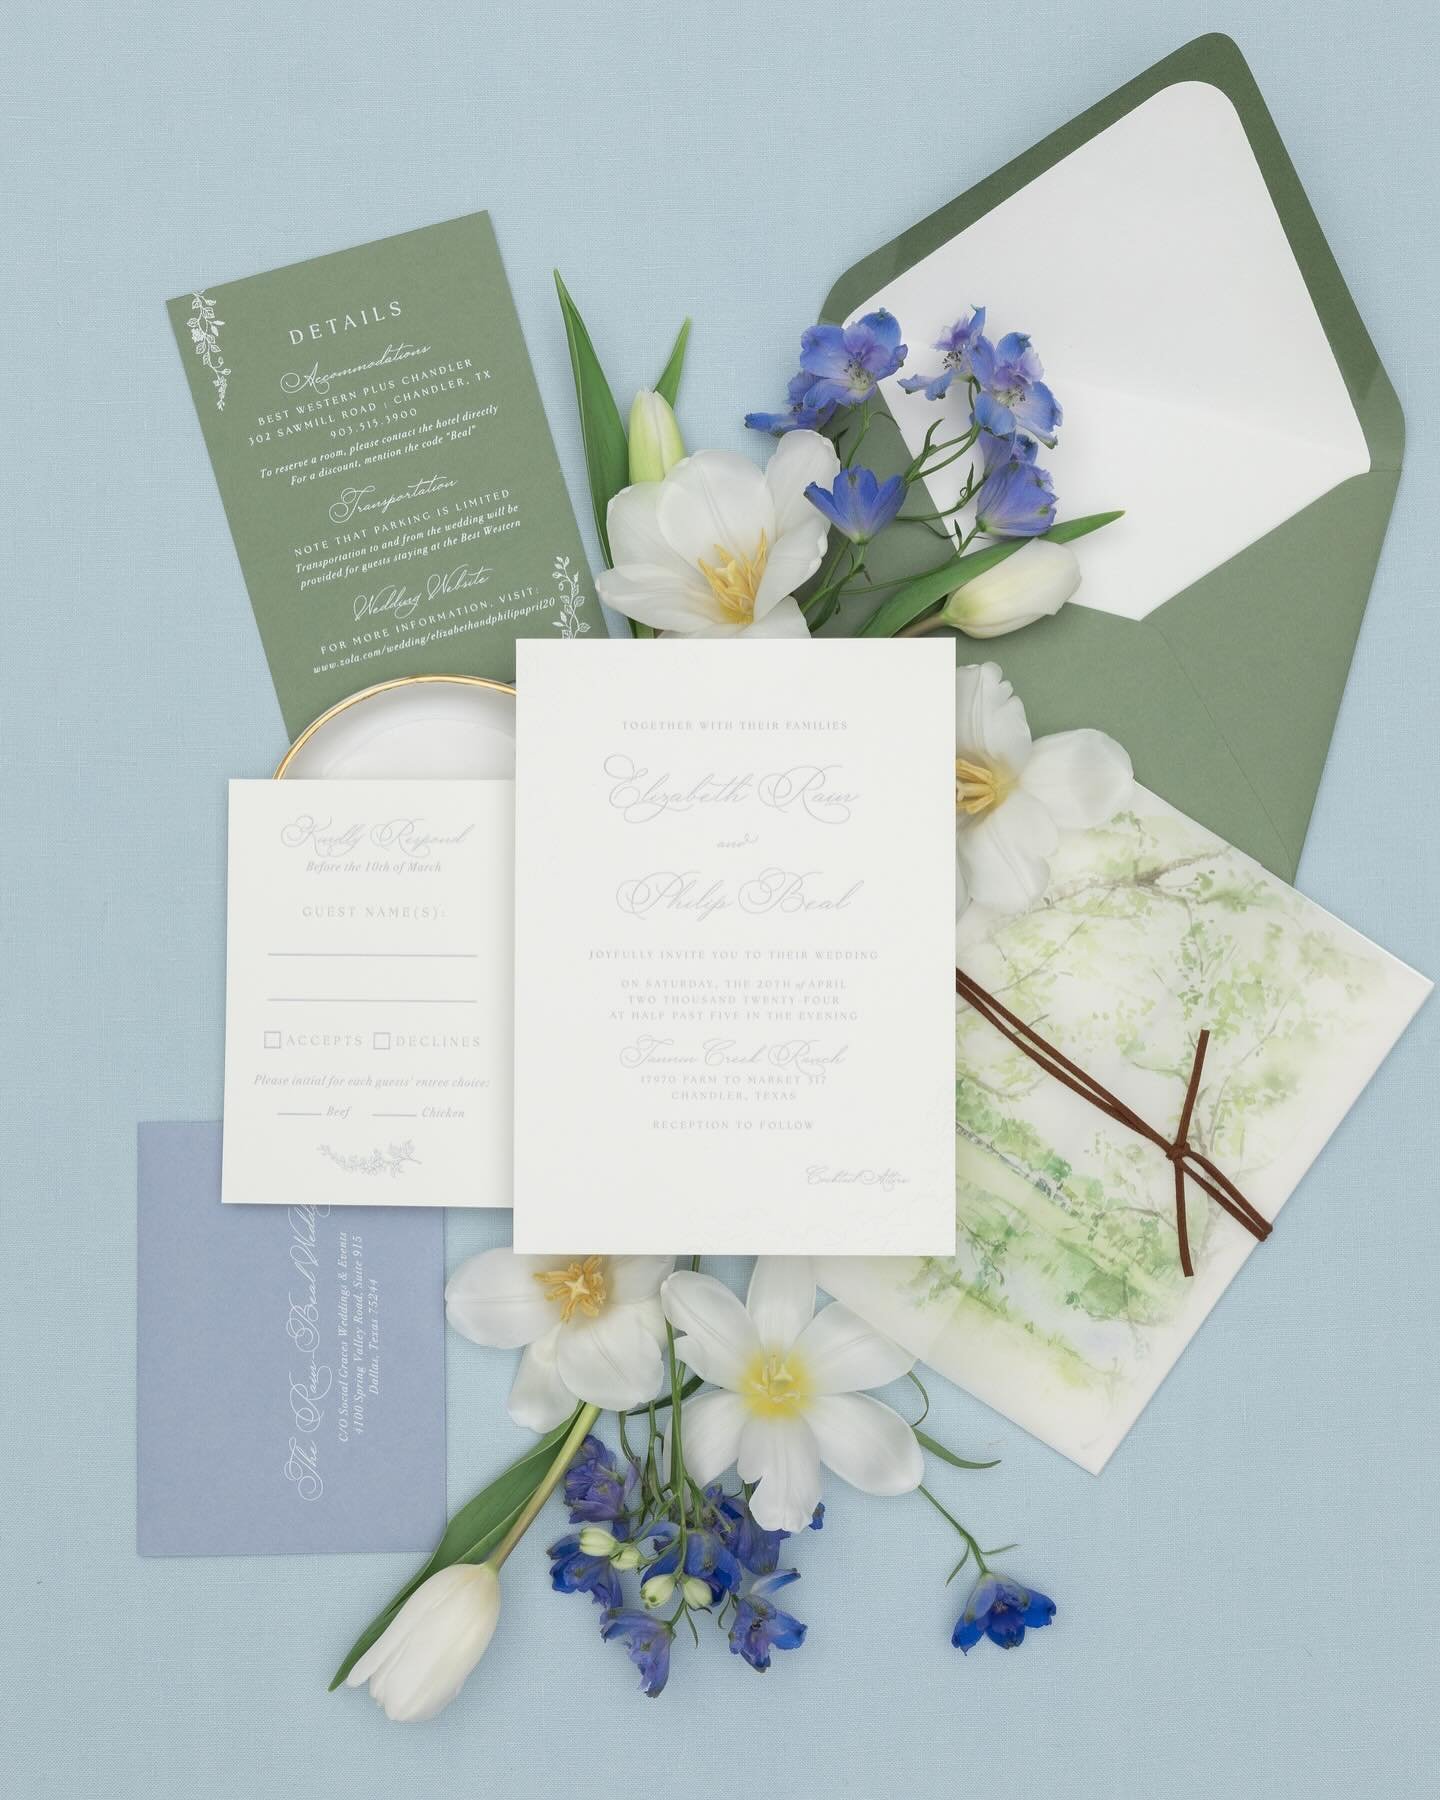 Elizabeth and Philip&rsquo;s invitation showcased delicate florals, letterpress printed in a soft blue. The suite was packaged with vellum wrap with watercolor illustration of their home and bound with leather tie.⁠
.⁠
Photography + Styling | @julian